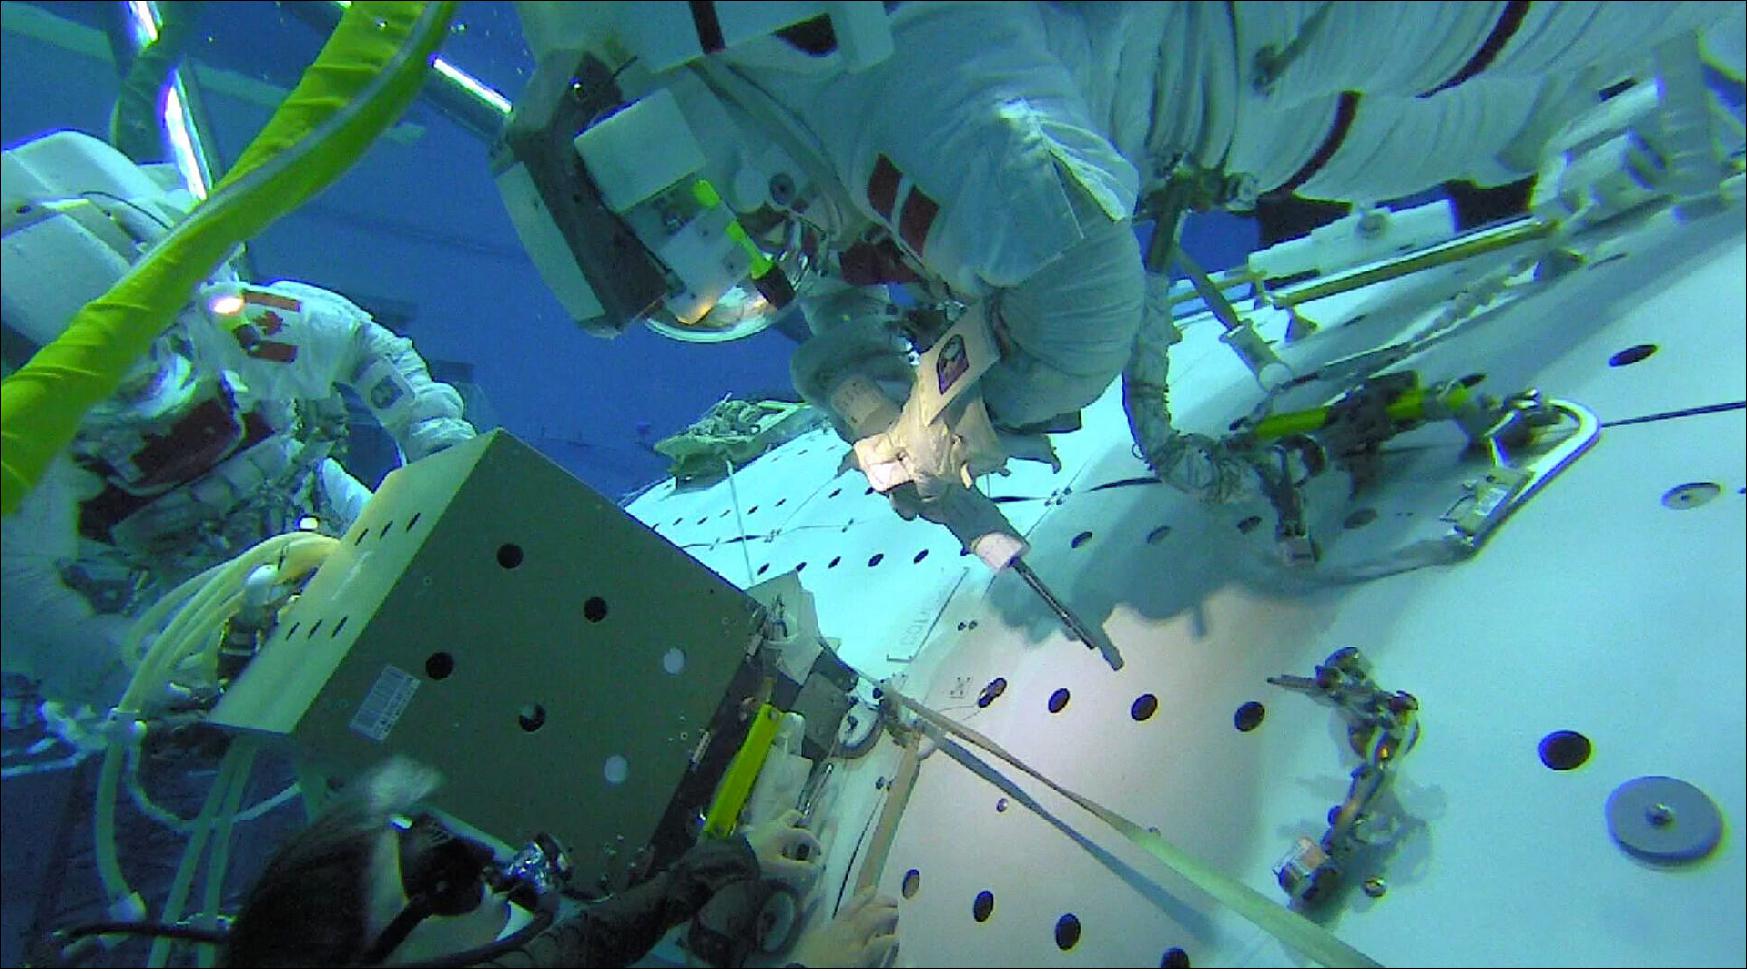 Figure 11: ESA astronaut Andreas Mogensen is seen in this image installing the Columbus Ka-band or ColKa terminal that will enable faster communication with Europe during a ‘dress rehearsal’ in the Neutral Buoyancy Lab at NASA’s Johnson Space Center in Houston, Texas in 2018 (image credit: NASA EVA NBL)